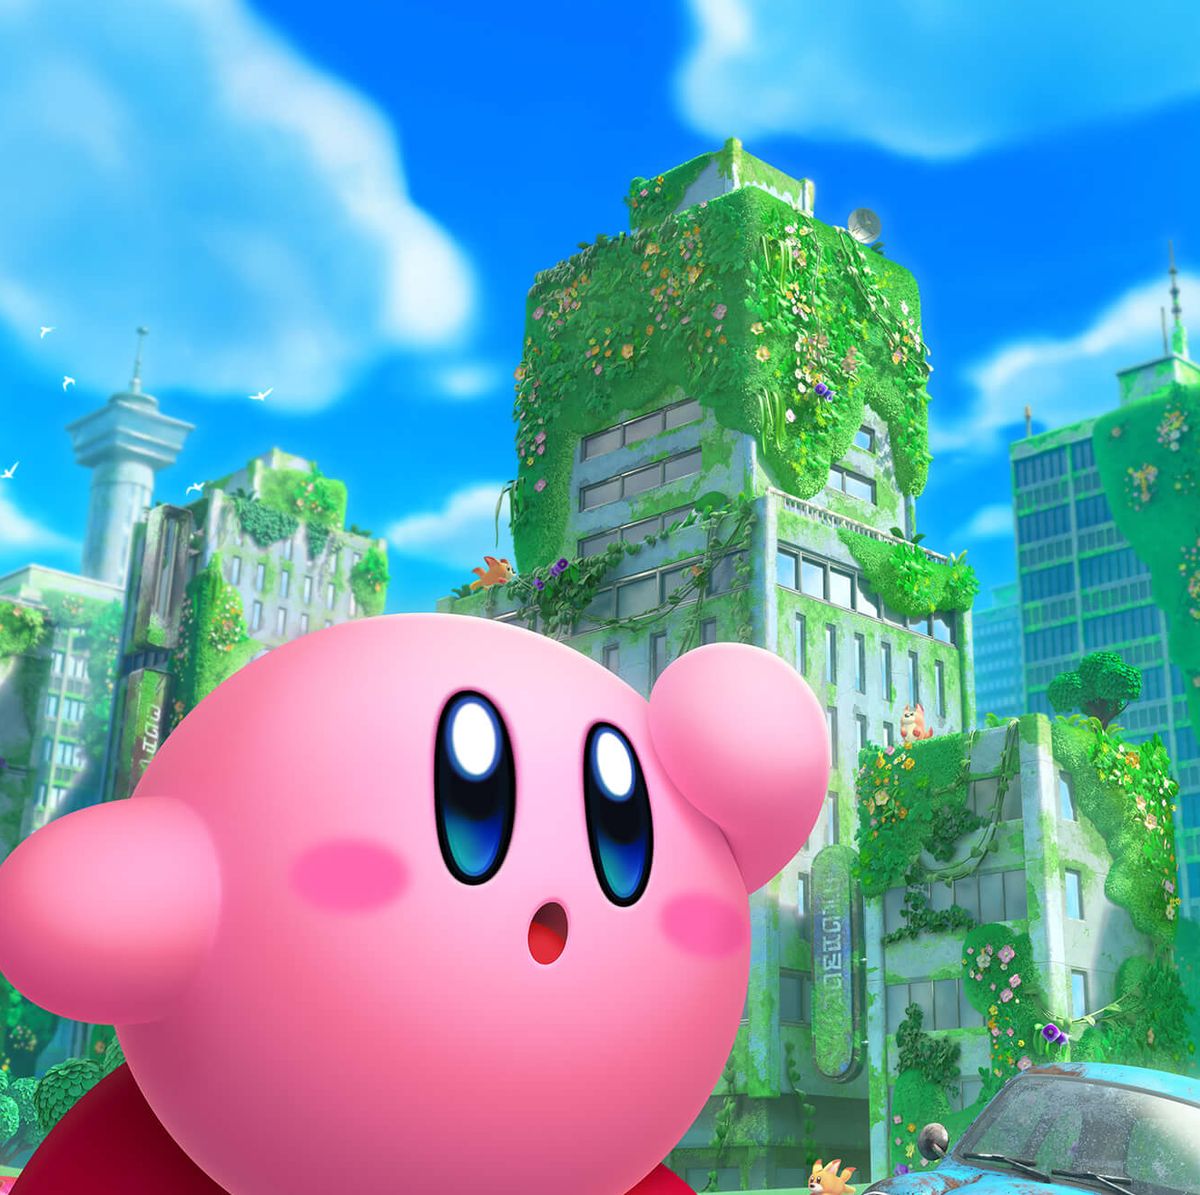 The best Kirby and the Forgotten Land deals on Nintendo Switch